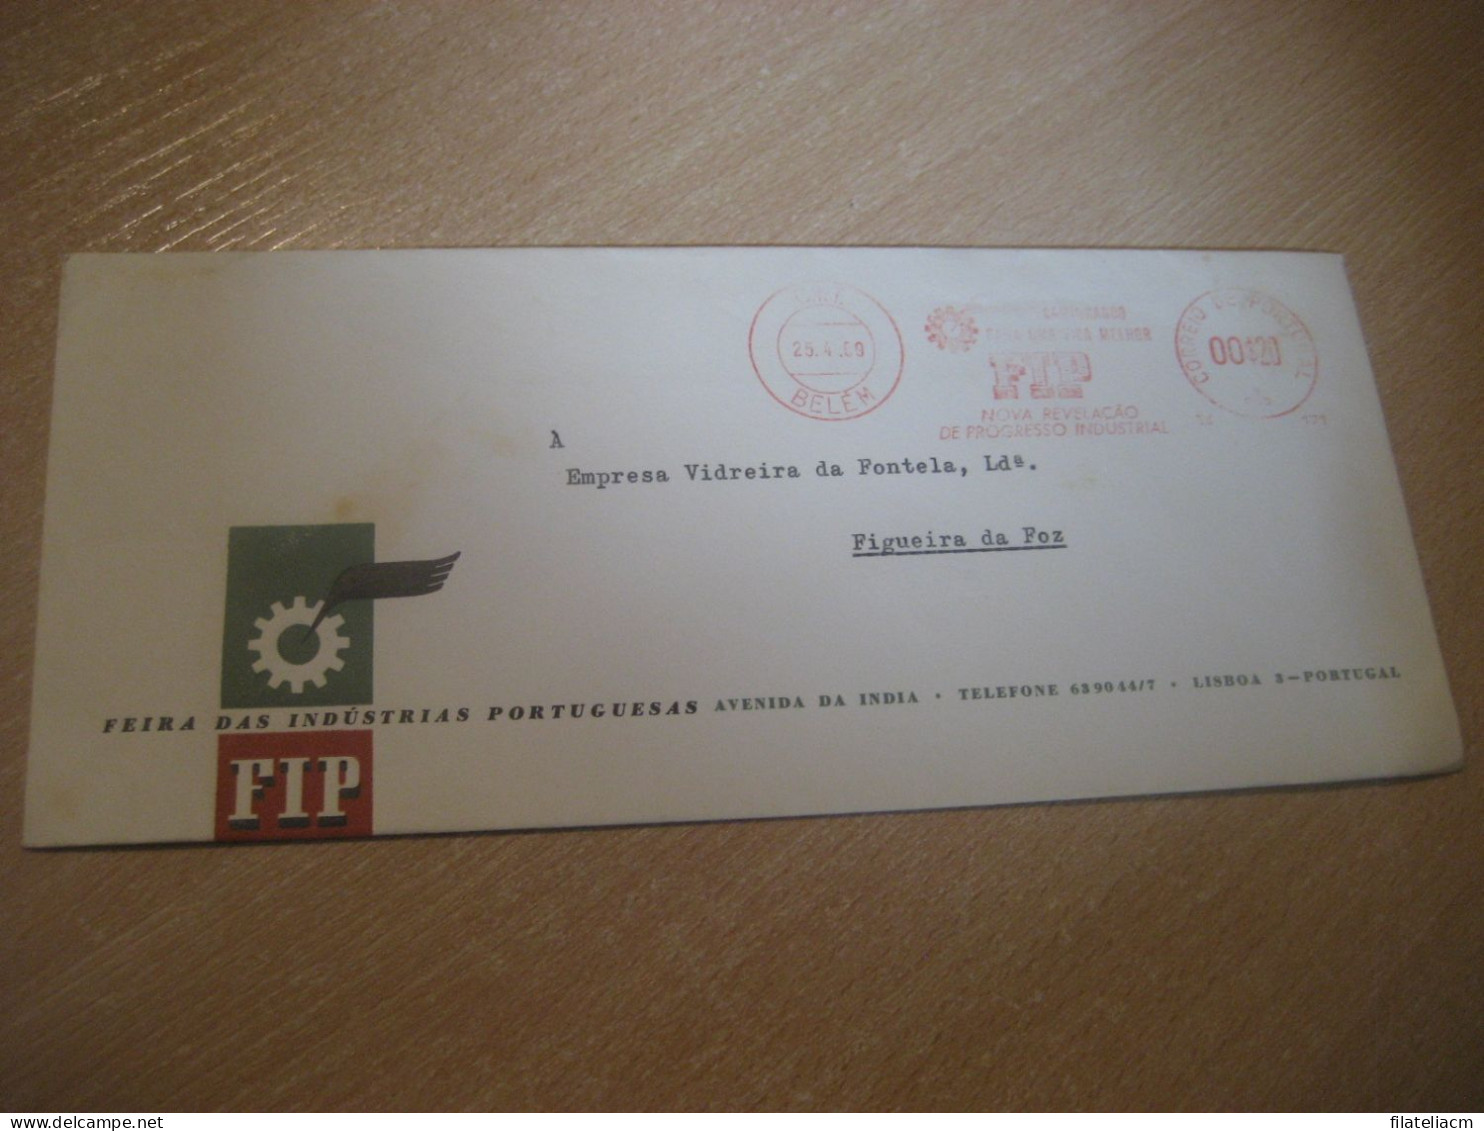 BELEM 1959 To Figueira Da Foz FIP Feira Das Industrias Industry Fair Meter Mail Cancel Cover PORTUGAL - Lettres & Documents